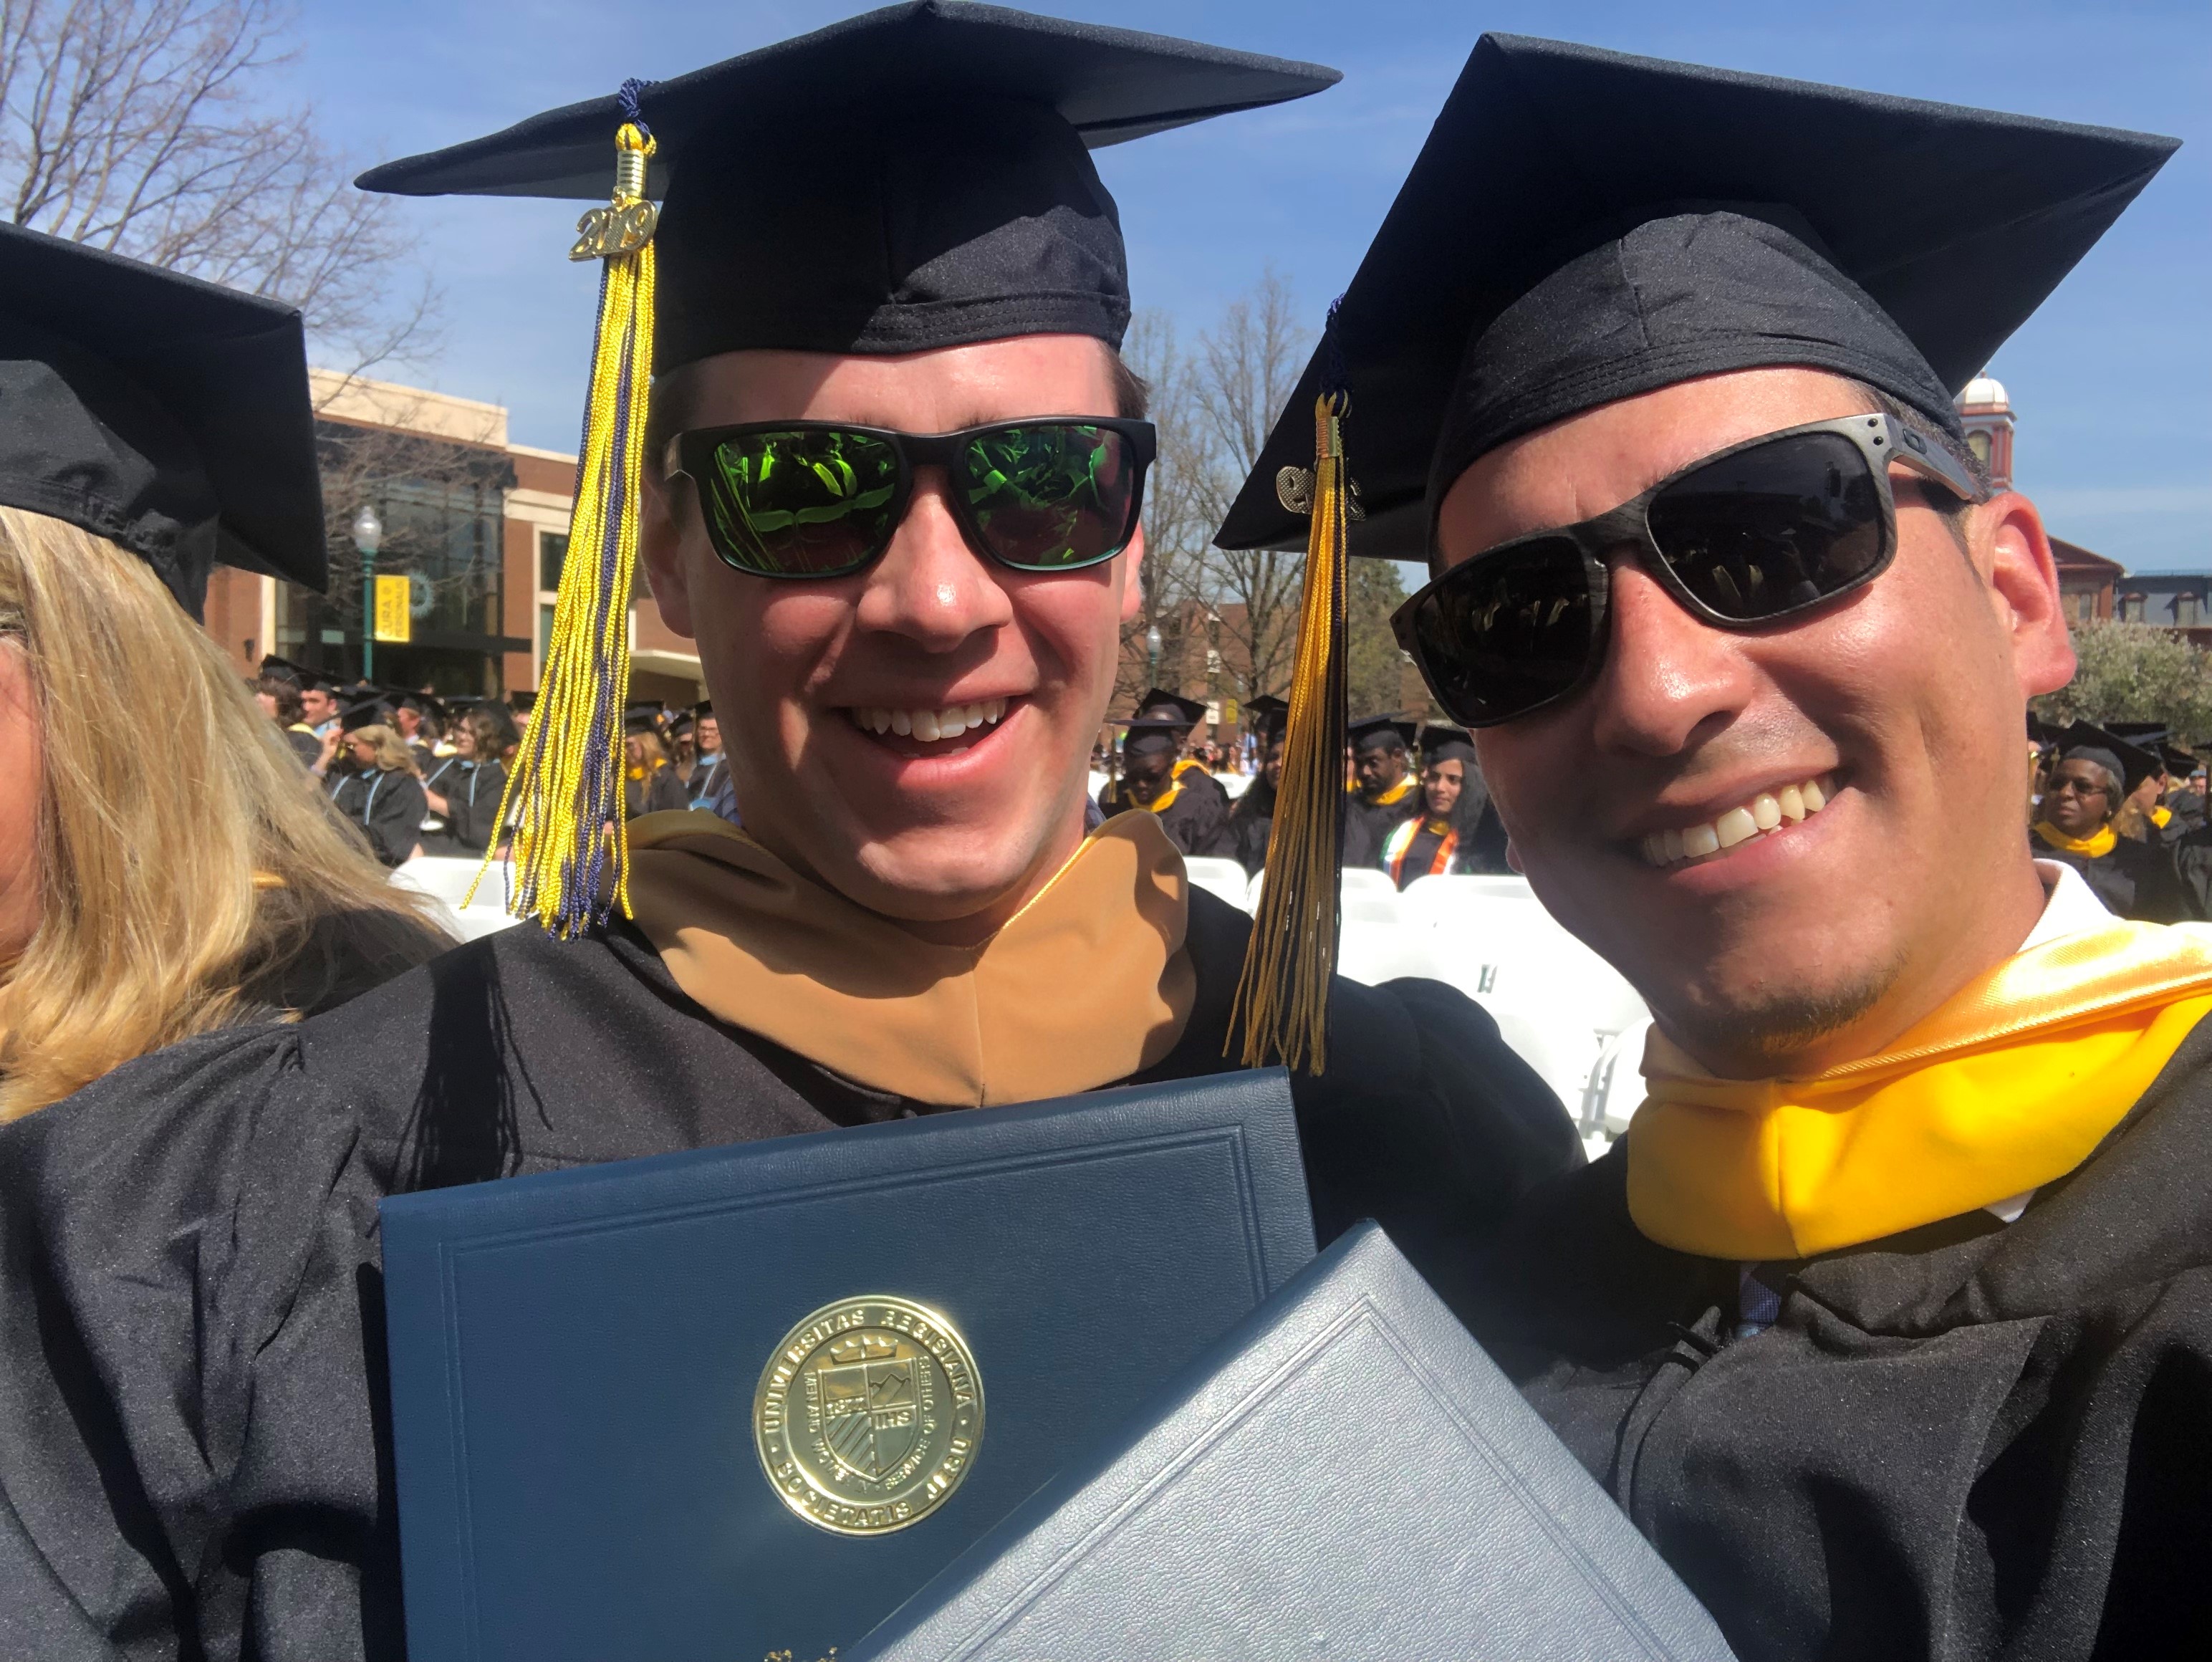 Two men in sunglasses with graduation caps, tassels and gowns smile for the camera.